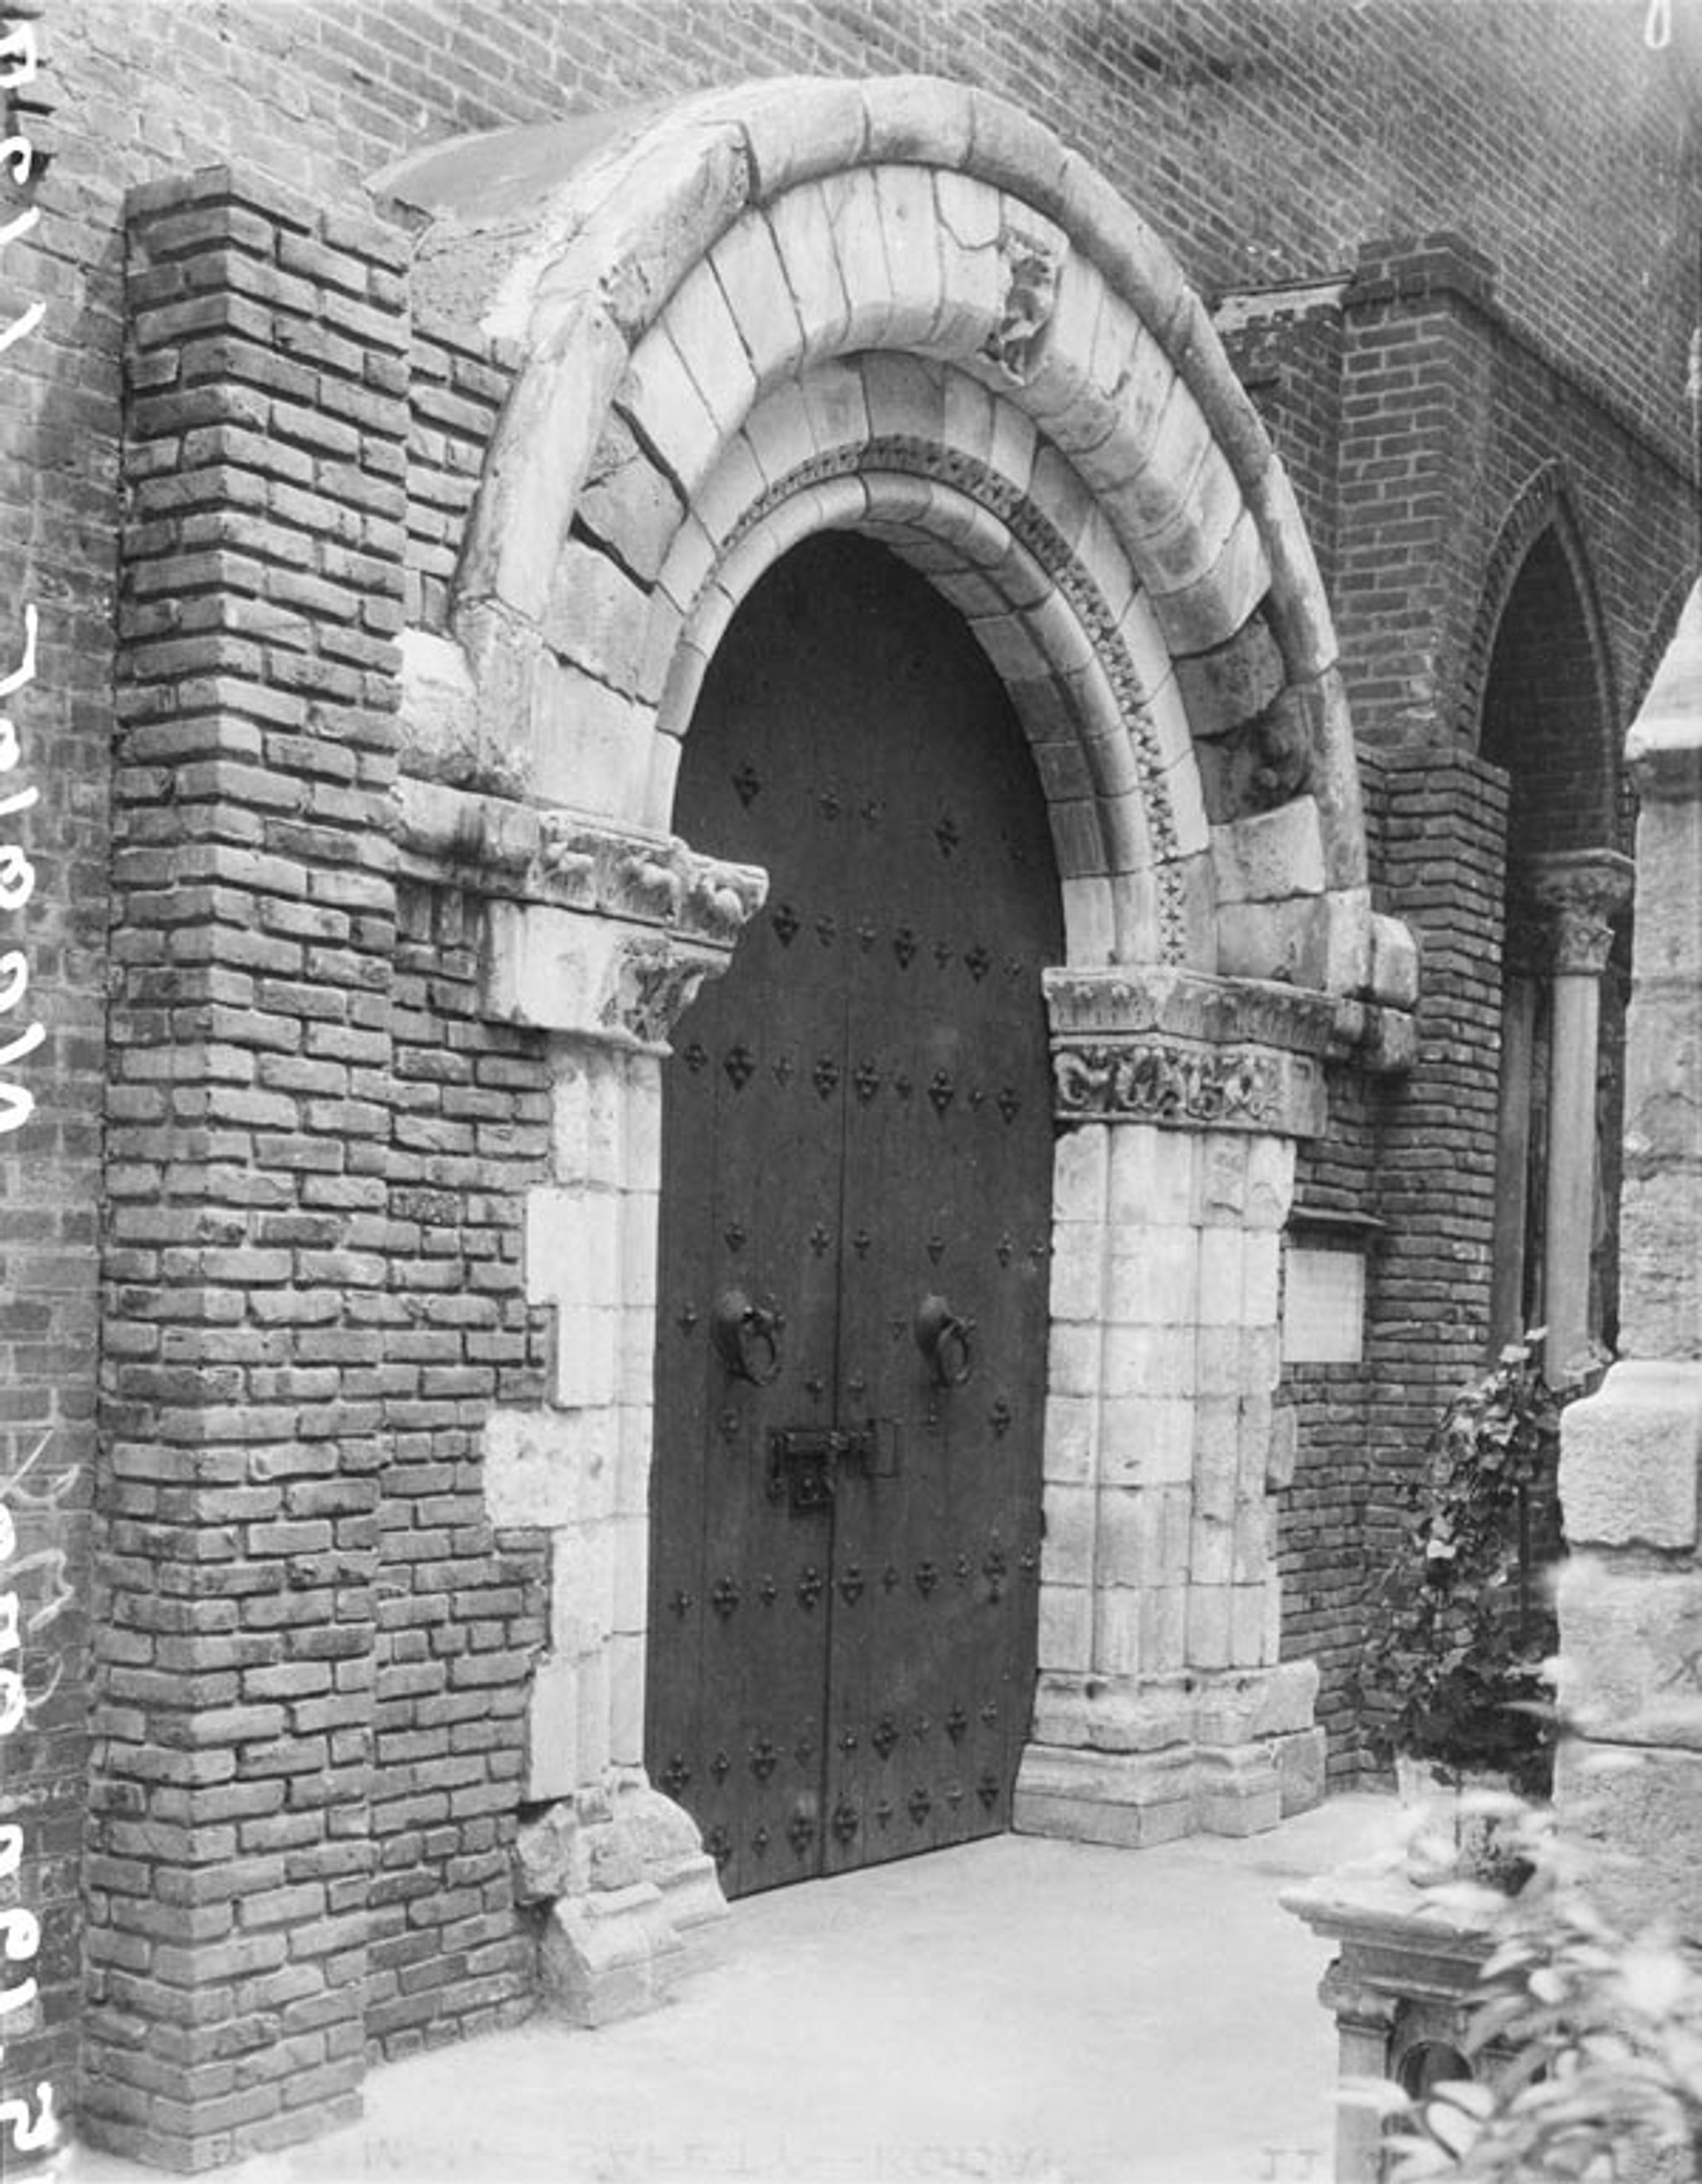 The portal installed at the main entrance to The Cloisters on Fort Washington Avenue